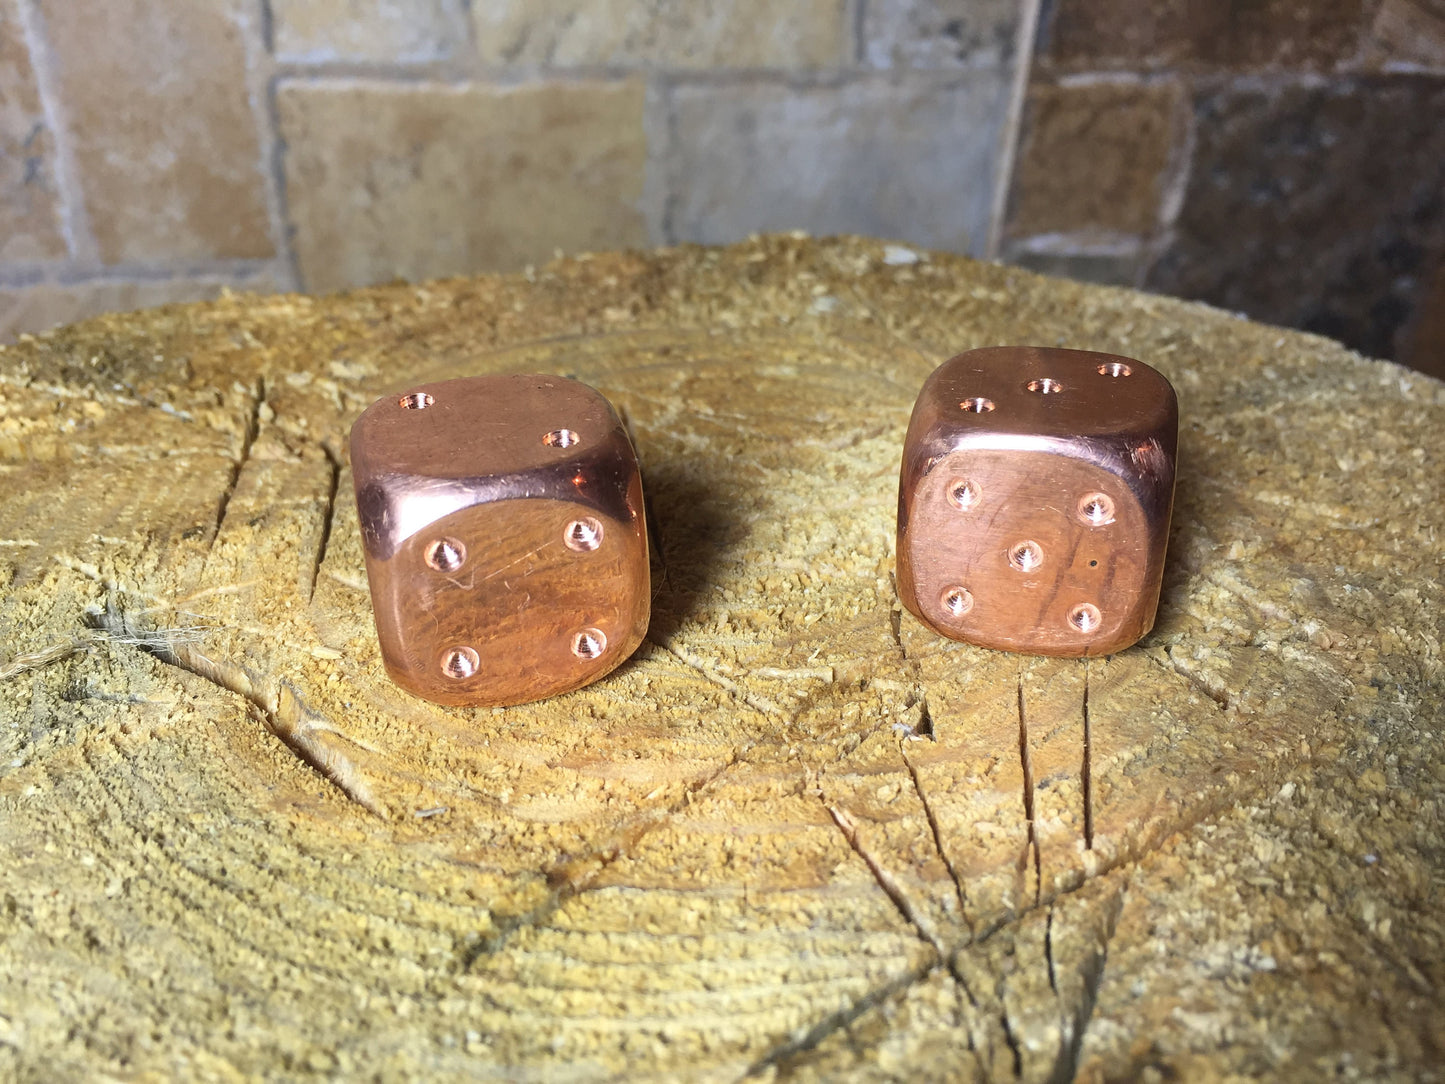 Copper dices, copper anniversary gift, copper gift, hand forged dices, 7 year gift, blacksmith dices, dice set, tabletop game, board game